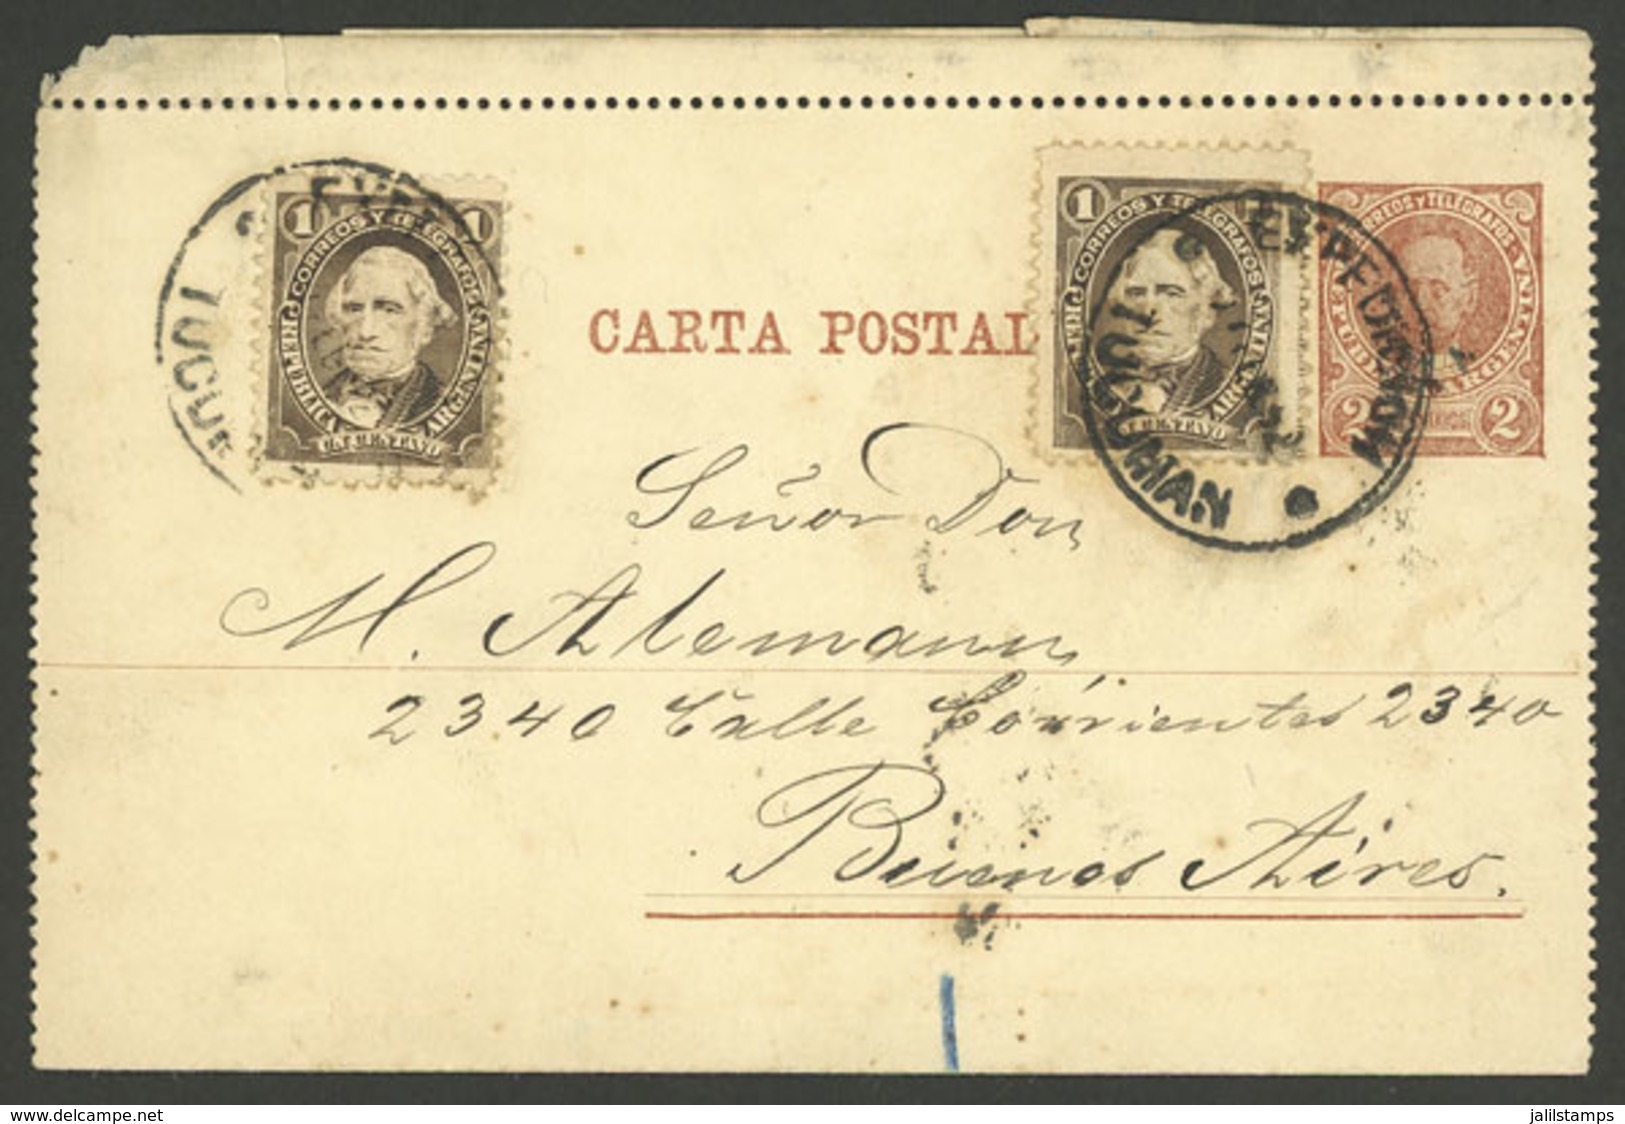 ARGENTINA: 25/FE/1892: Tucumán - Buenos Aires, 2c. Lettercard Uprated With  2x 1c. Vélez Sarsfield (total 4c.), VF Quali - Briefe U. Dokumente